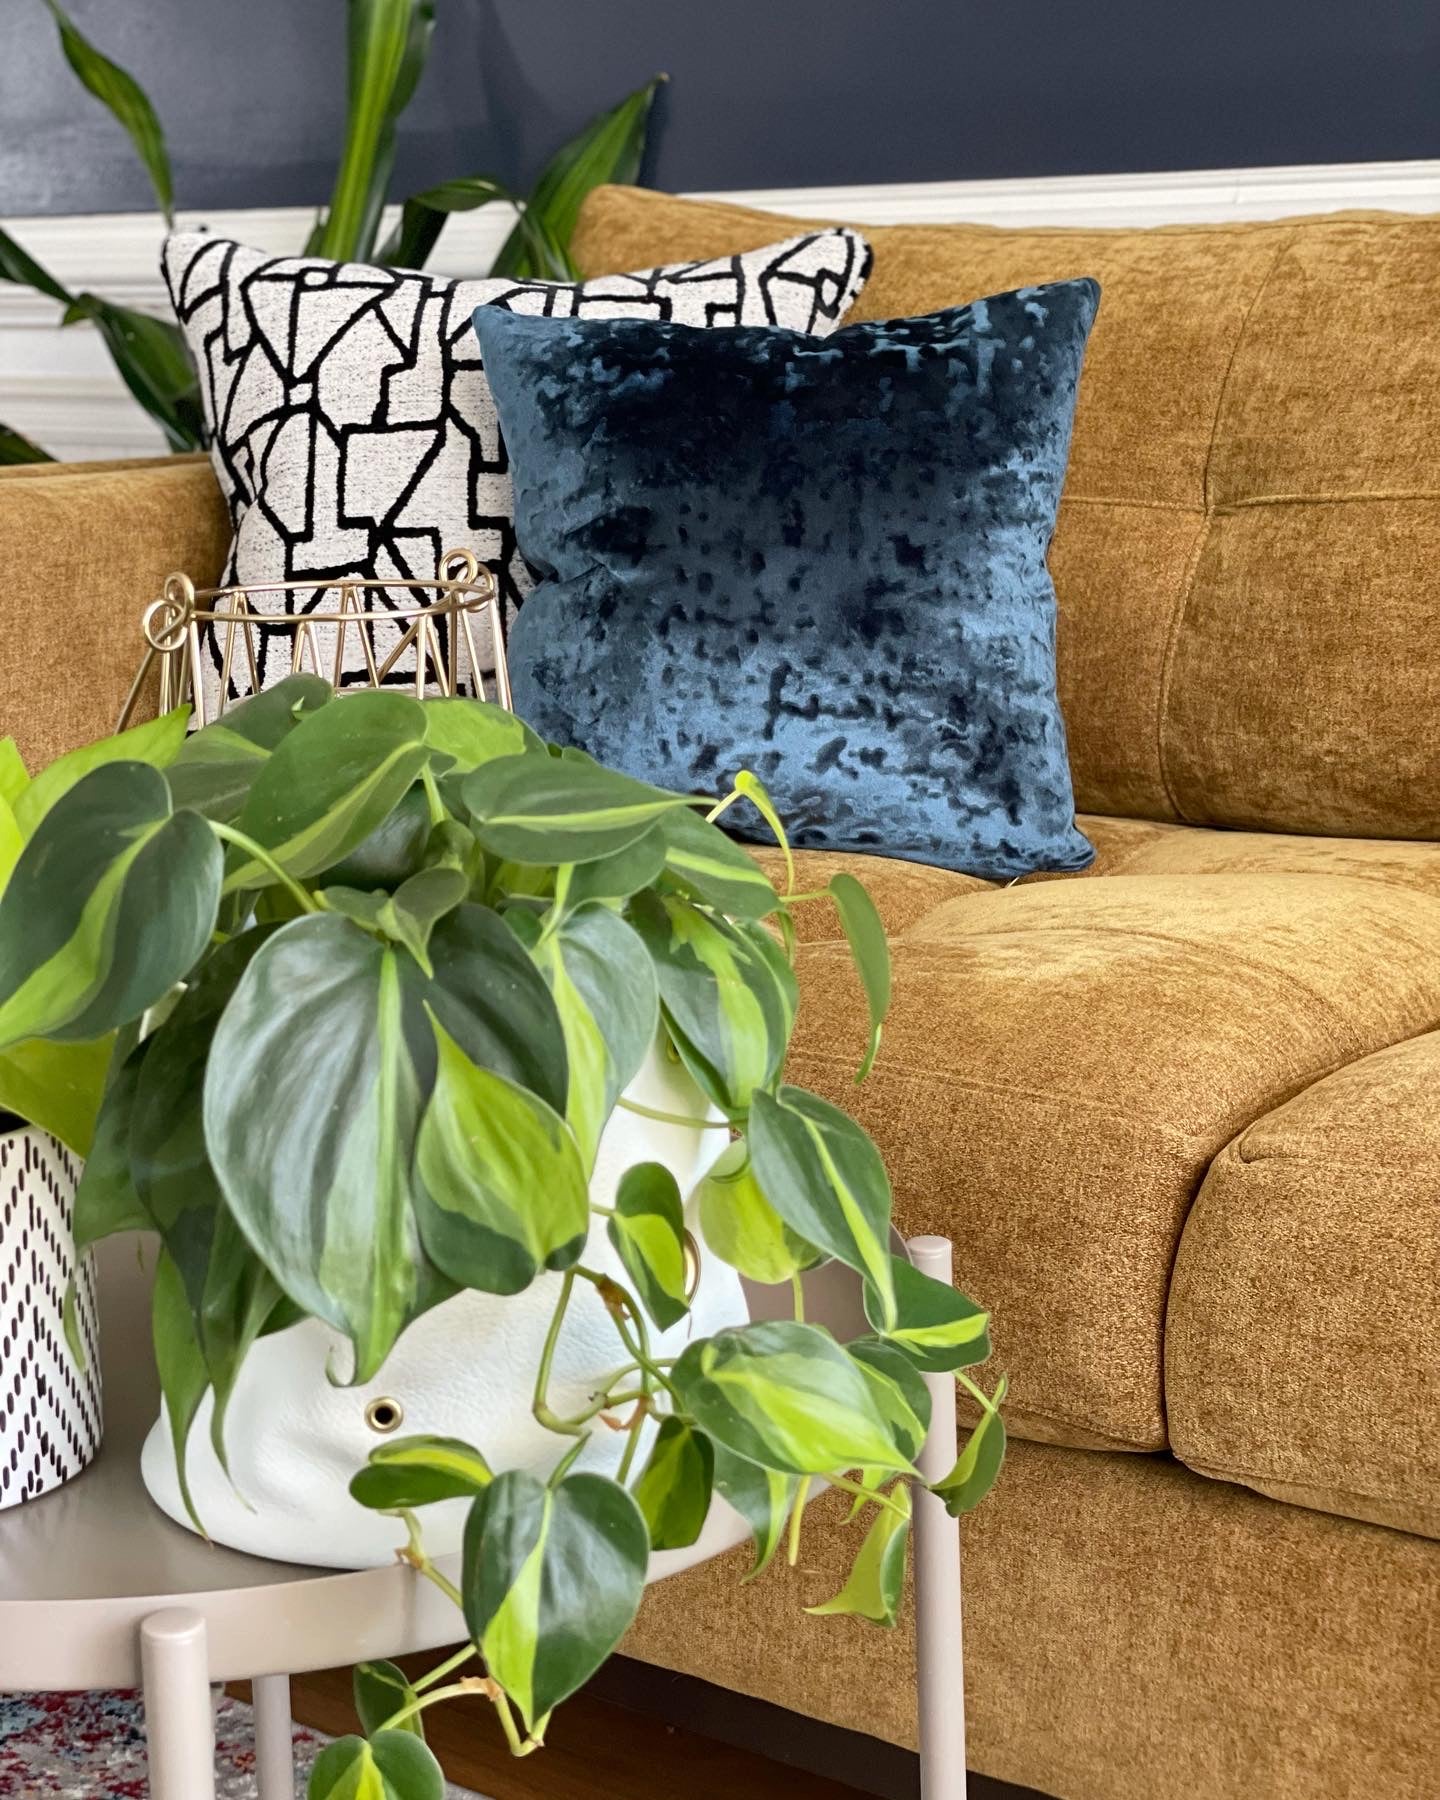 Plant in a white leather planter. Gold couch in background with two pillows on top, one white and black geometric and the other blue velvet.